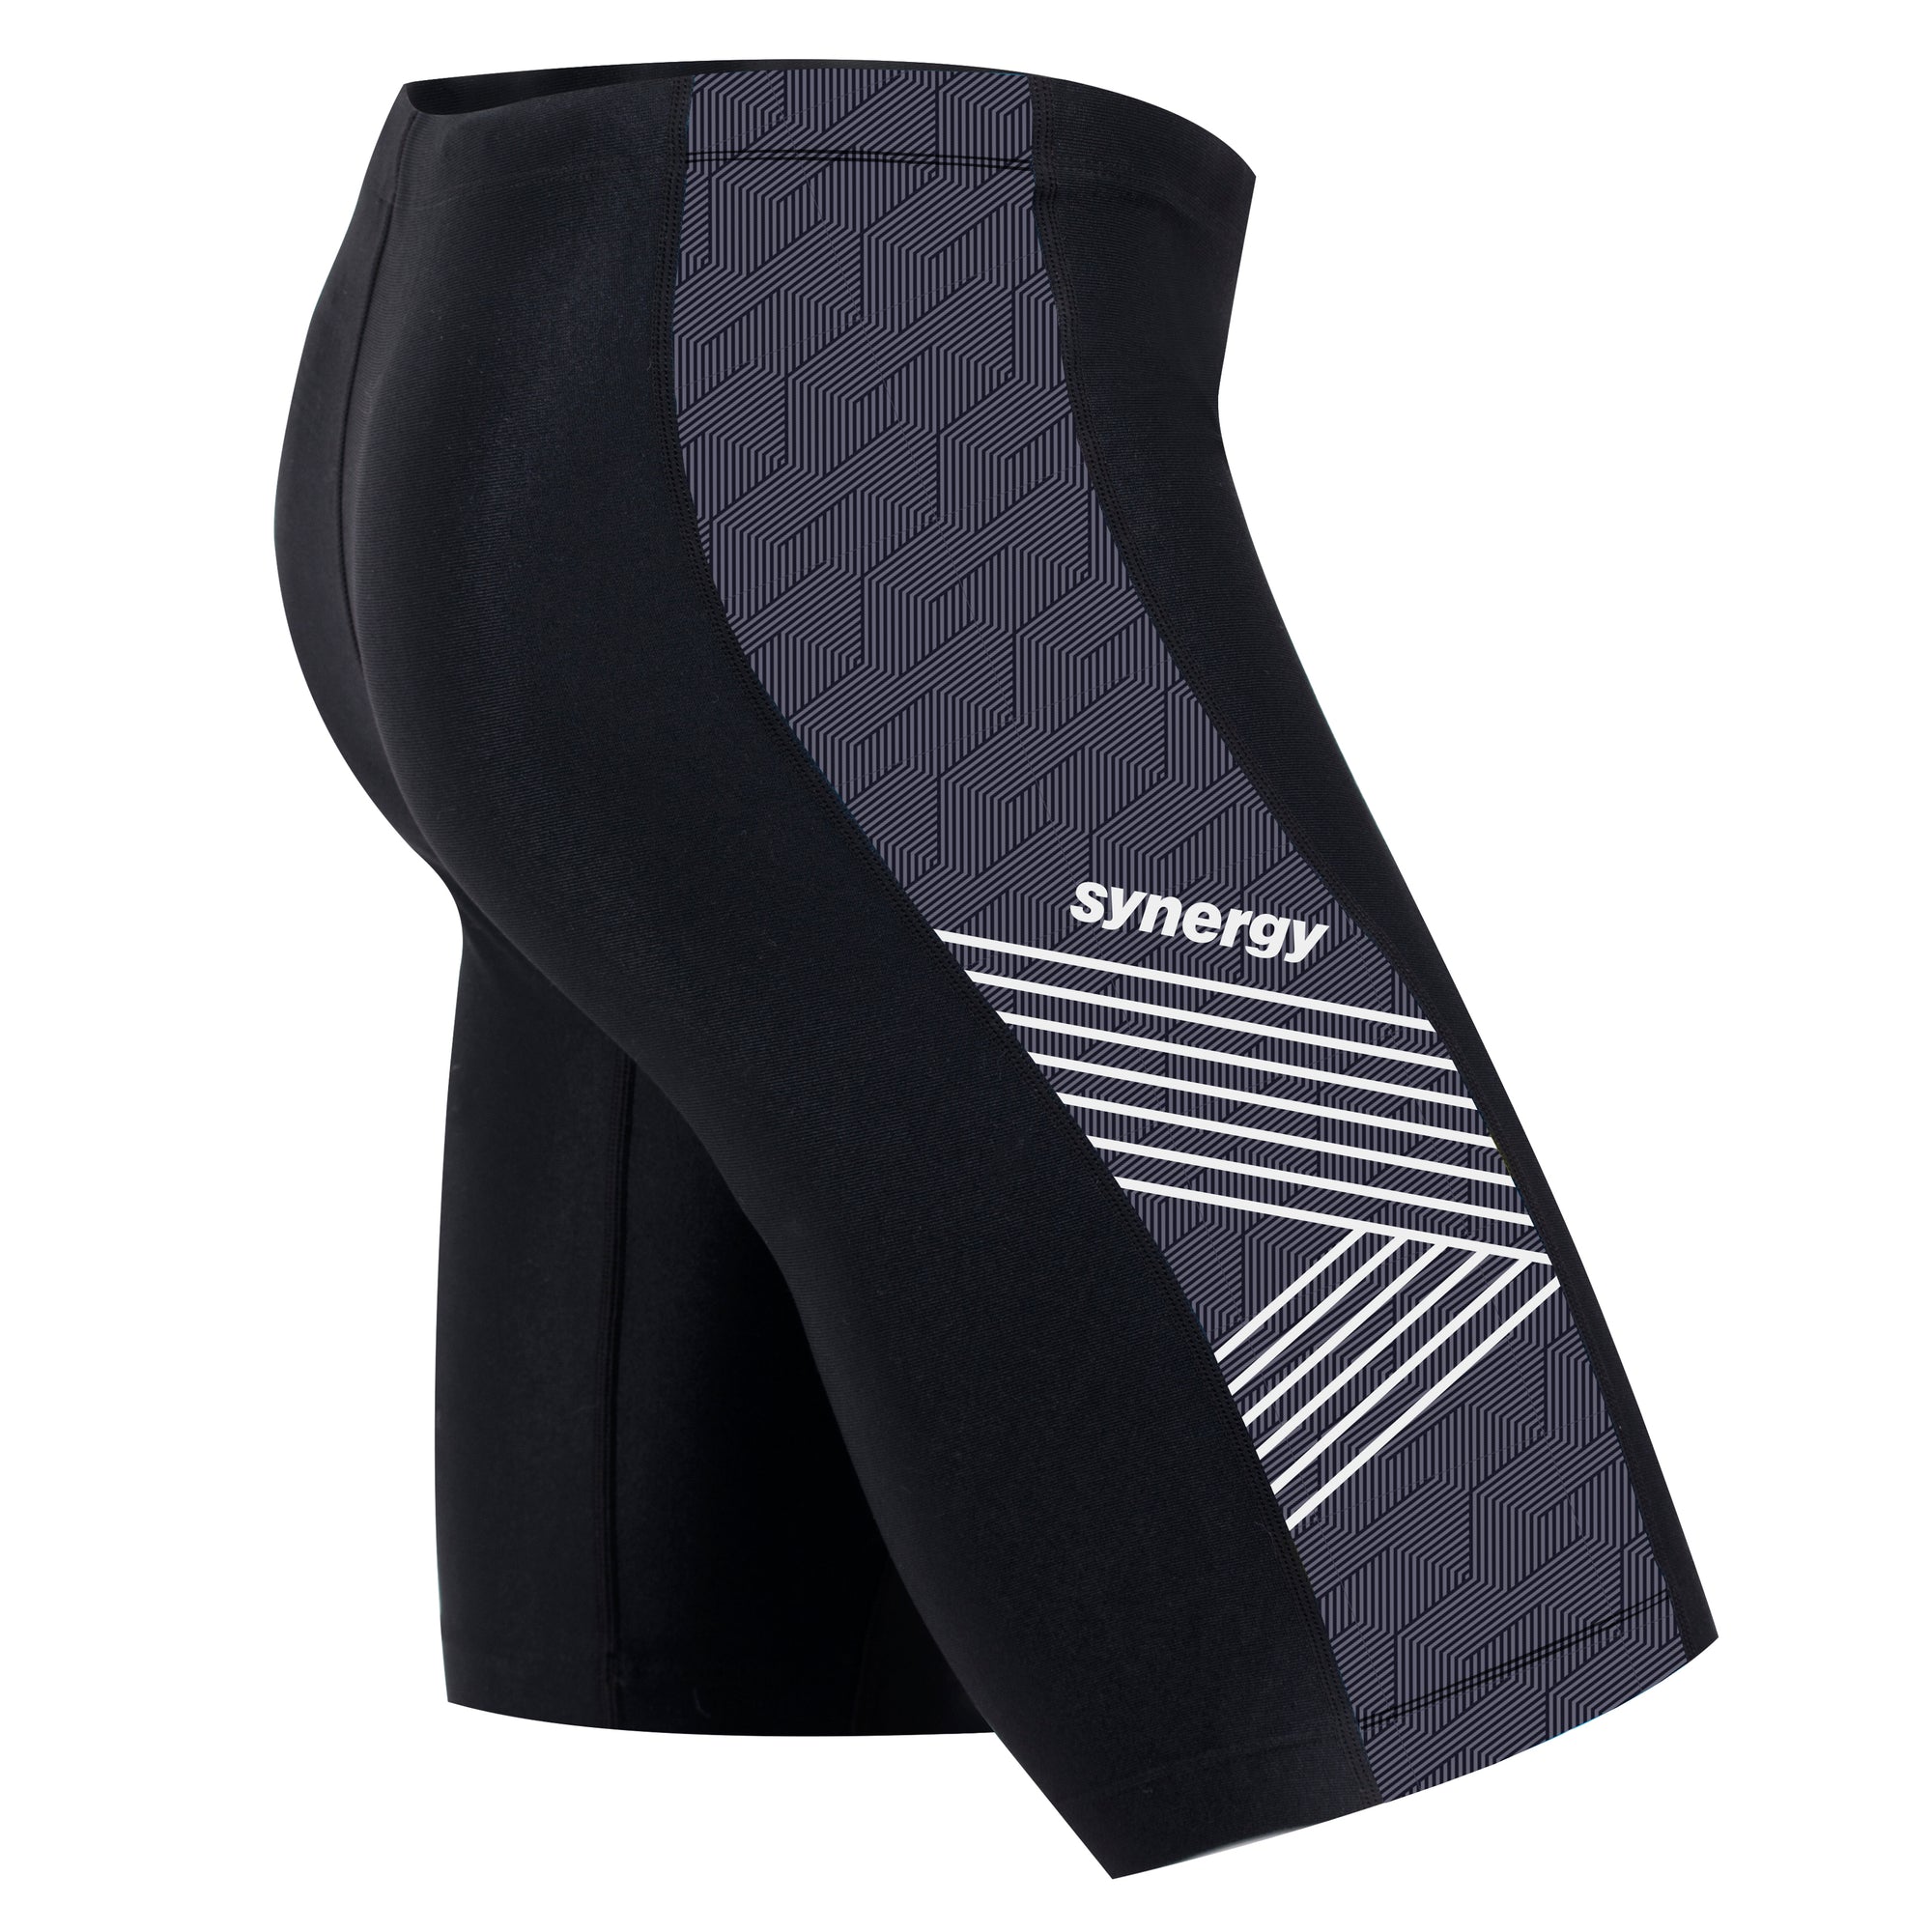 JAMMERS - Synergy Wetsuits